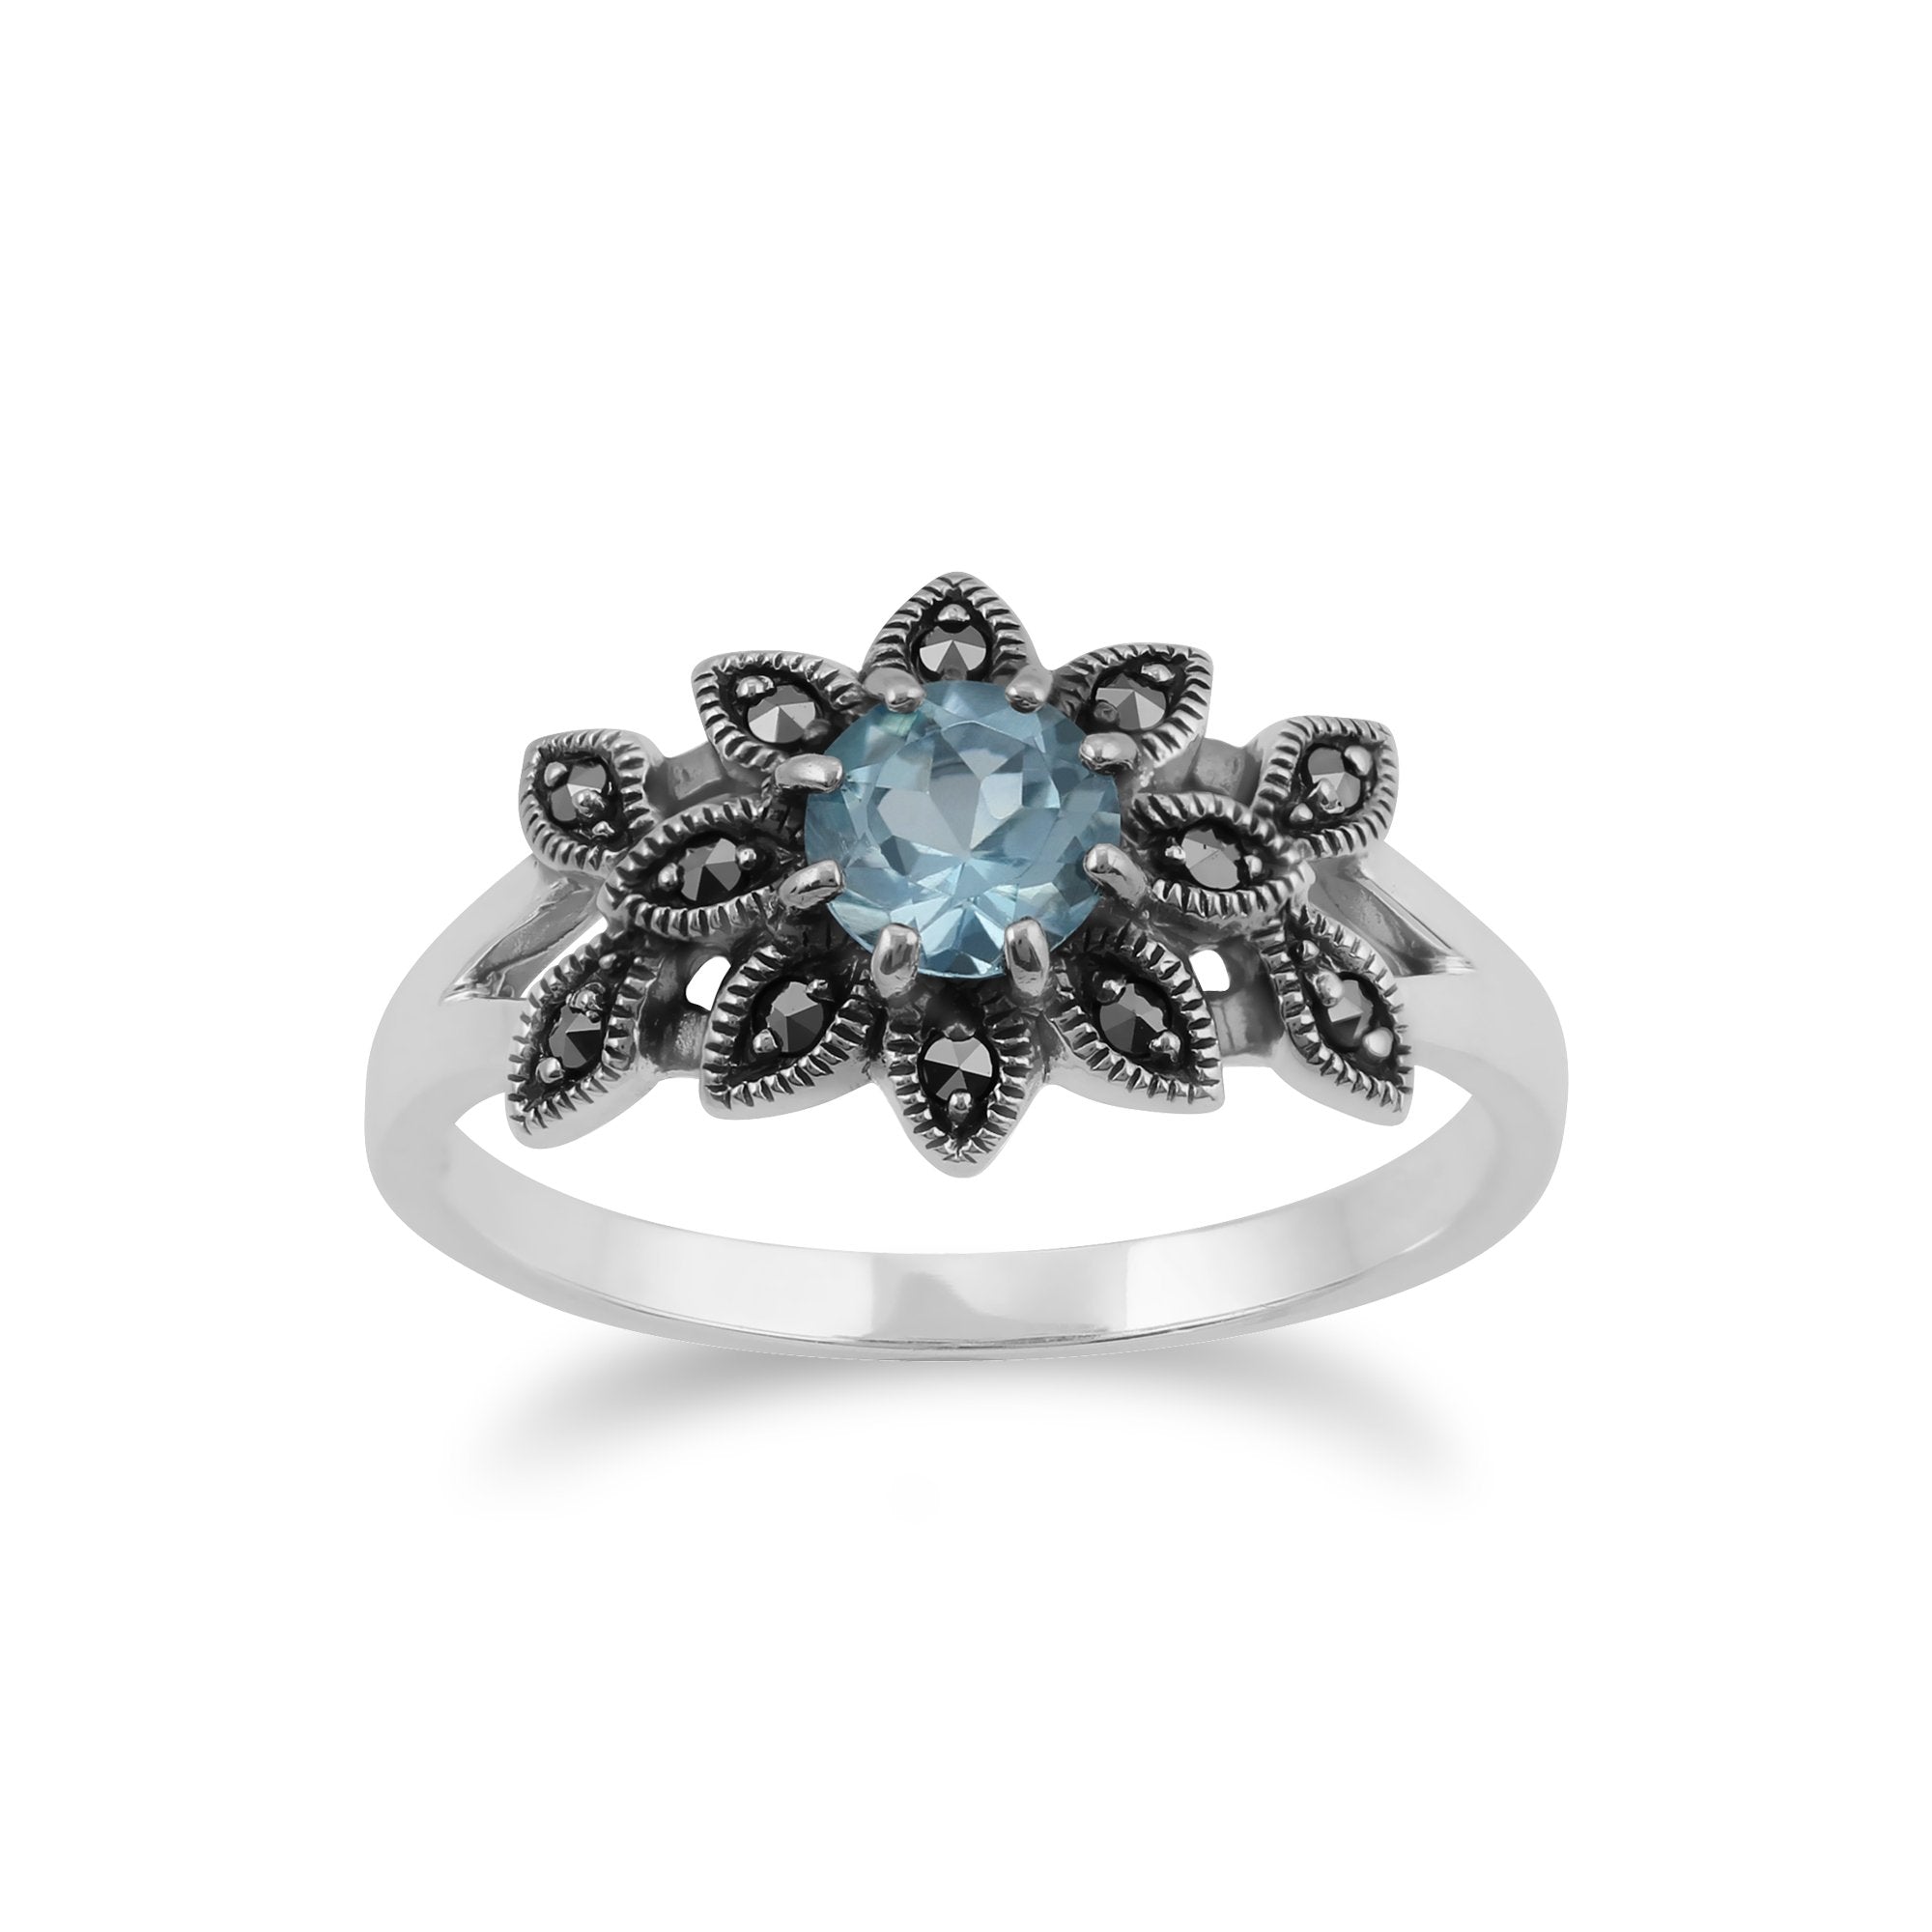 Art Nouveau Style Round Blue Topaz & Marcasite Floral Ring in Sterling Silver